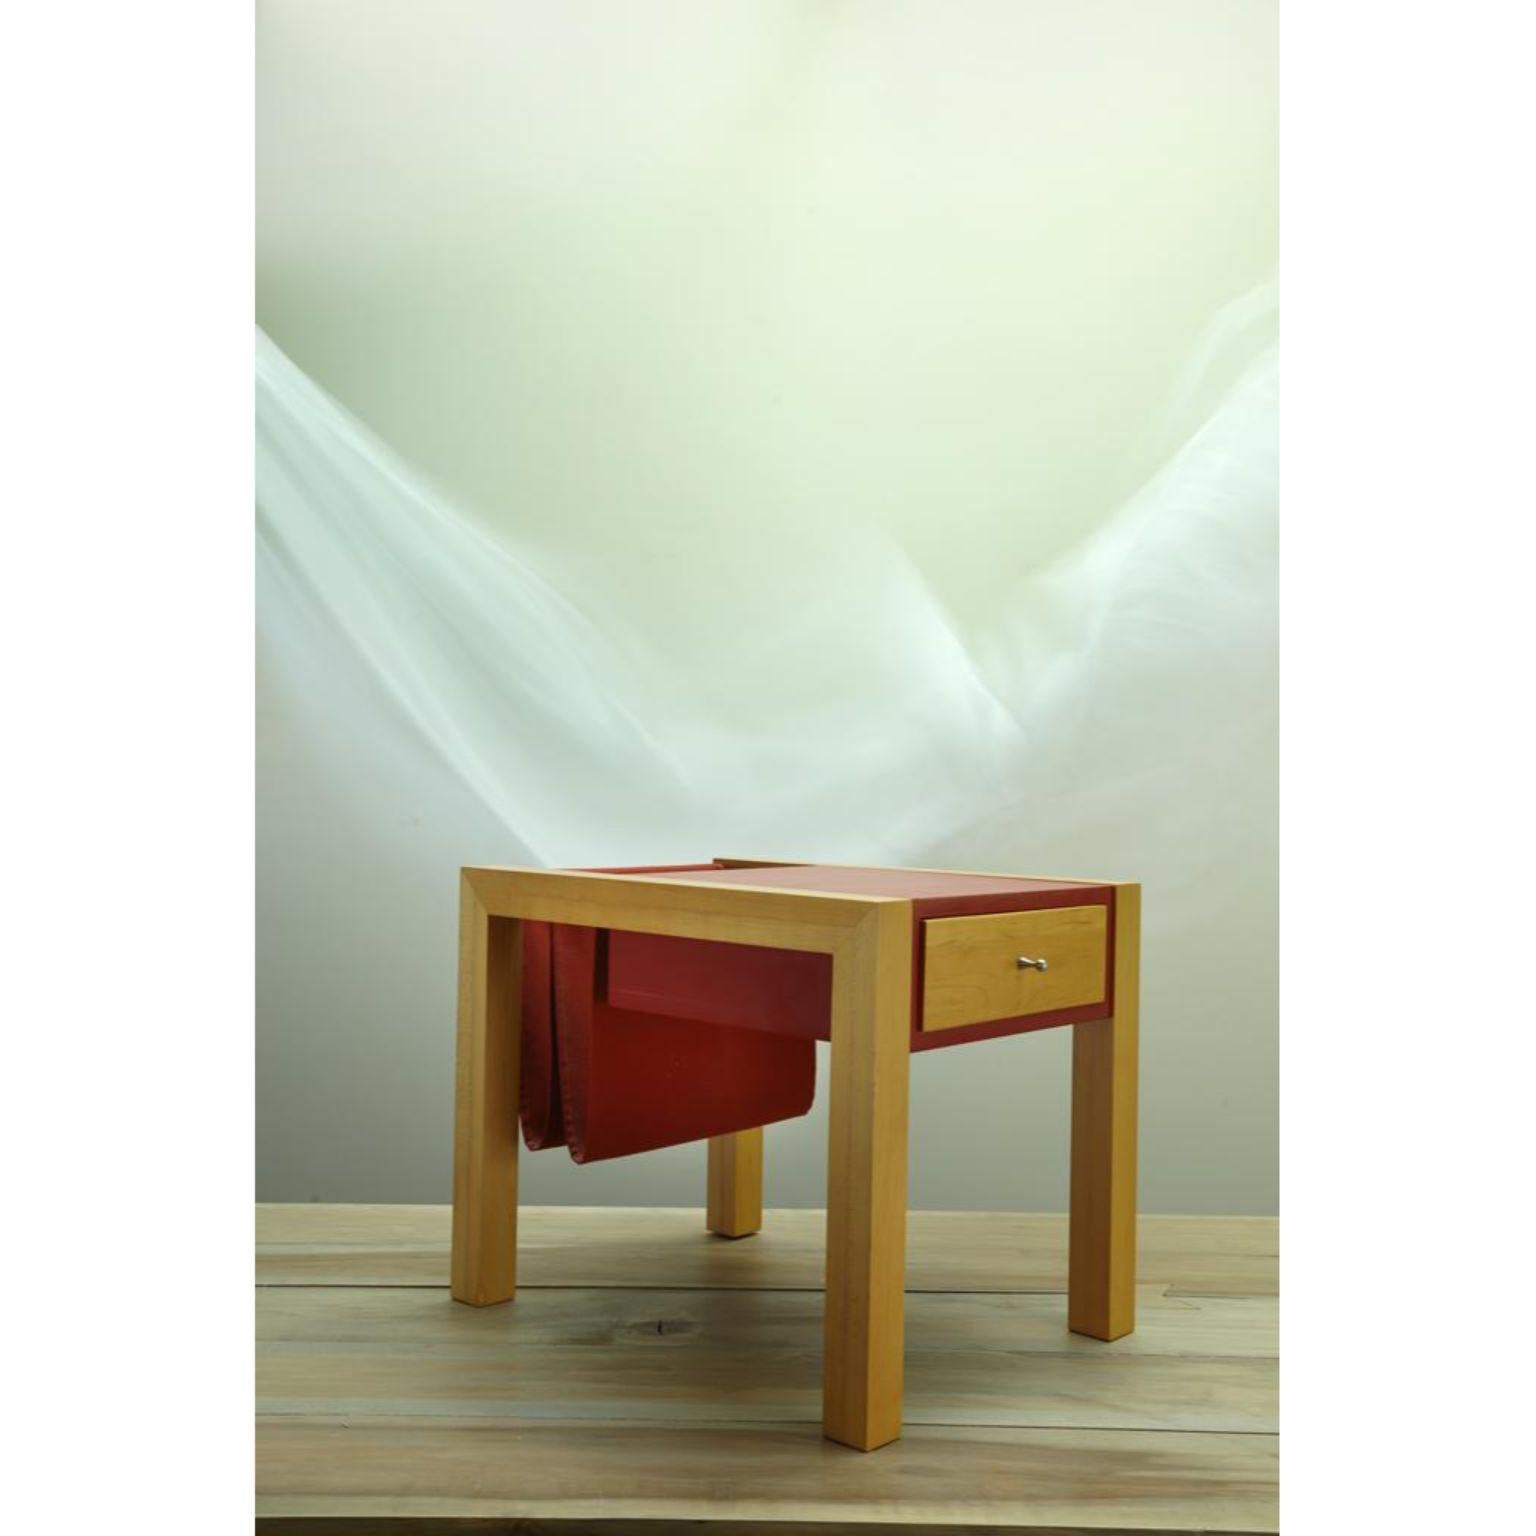 Joué side table by Jean-Baptiste Van den Heede
Signed and numbered
Dimensions: L 52 x W 41 x H 42 cm
Materials: Solid maple, red lacquer, fabric

Joué side table. Versatile furniture with drawer and magazine rack, for auxiliary table, bedside